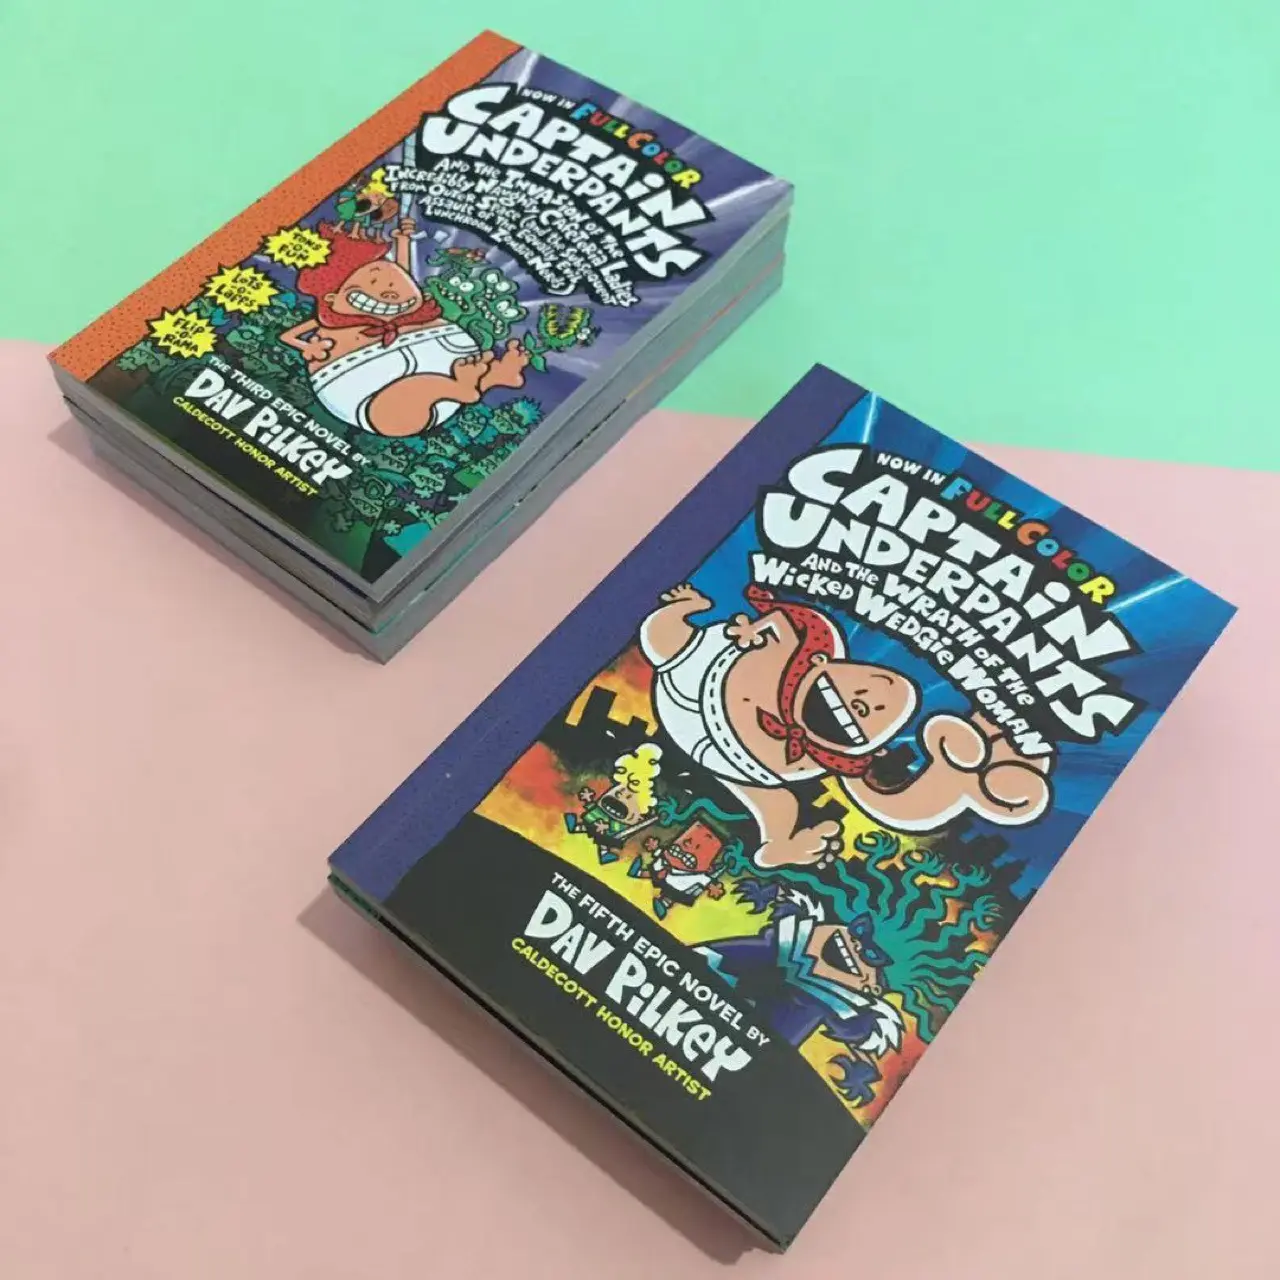 New Arrived 12 pcs/set Captain Underpants Full Color Smooth Paper Comic Dav Pilkey Picture Comic Books for Kids